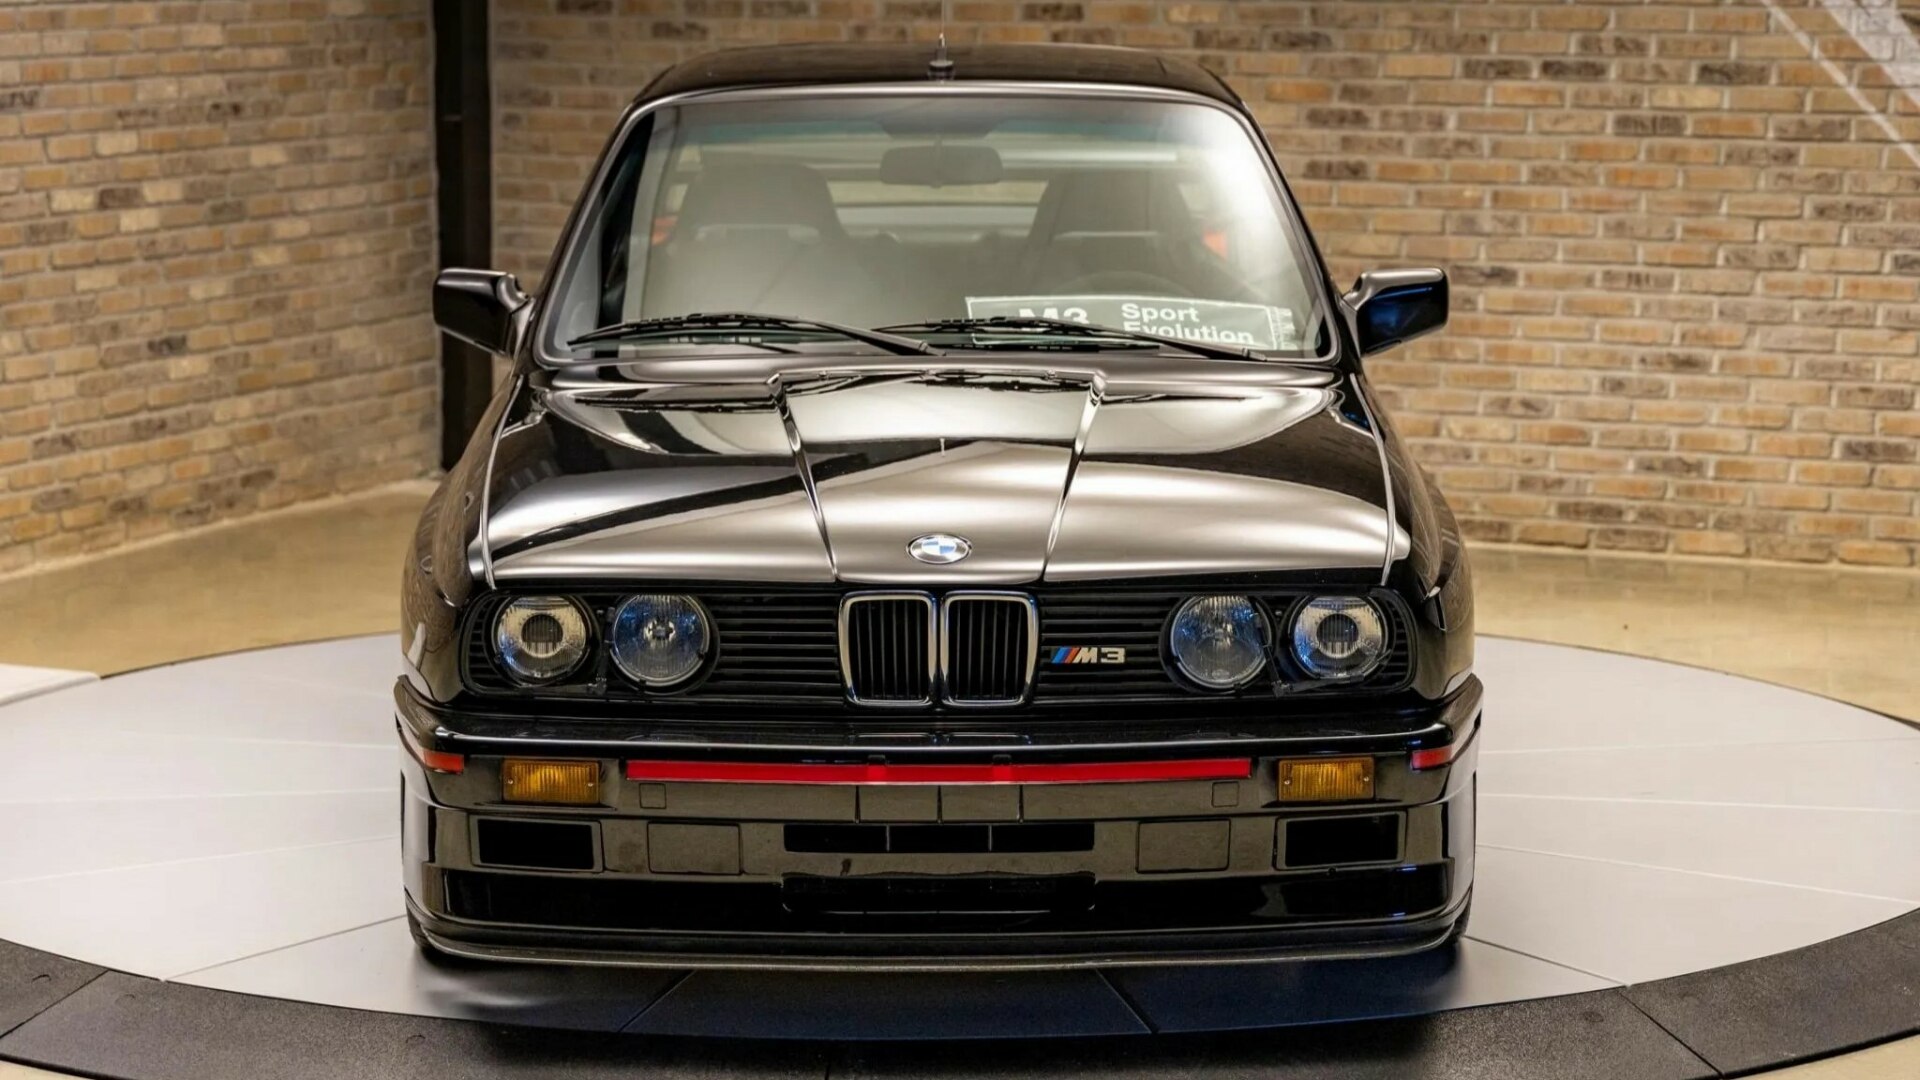 The Front Profile Of The BMW M3 Sport Evolution (Credits Bring a Trailer)